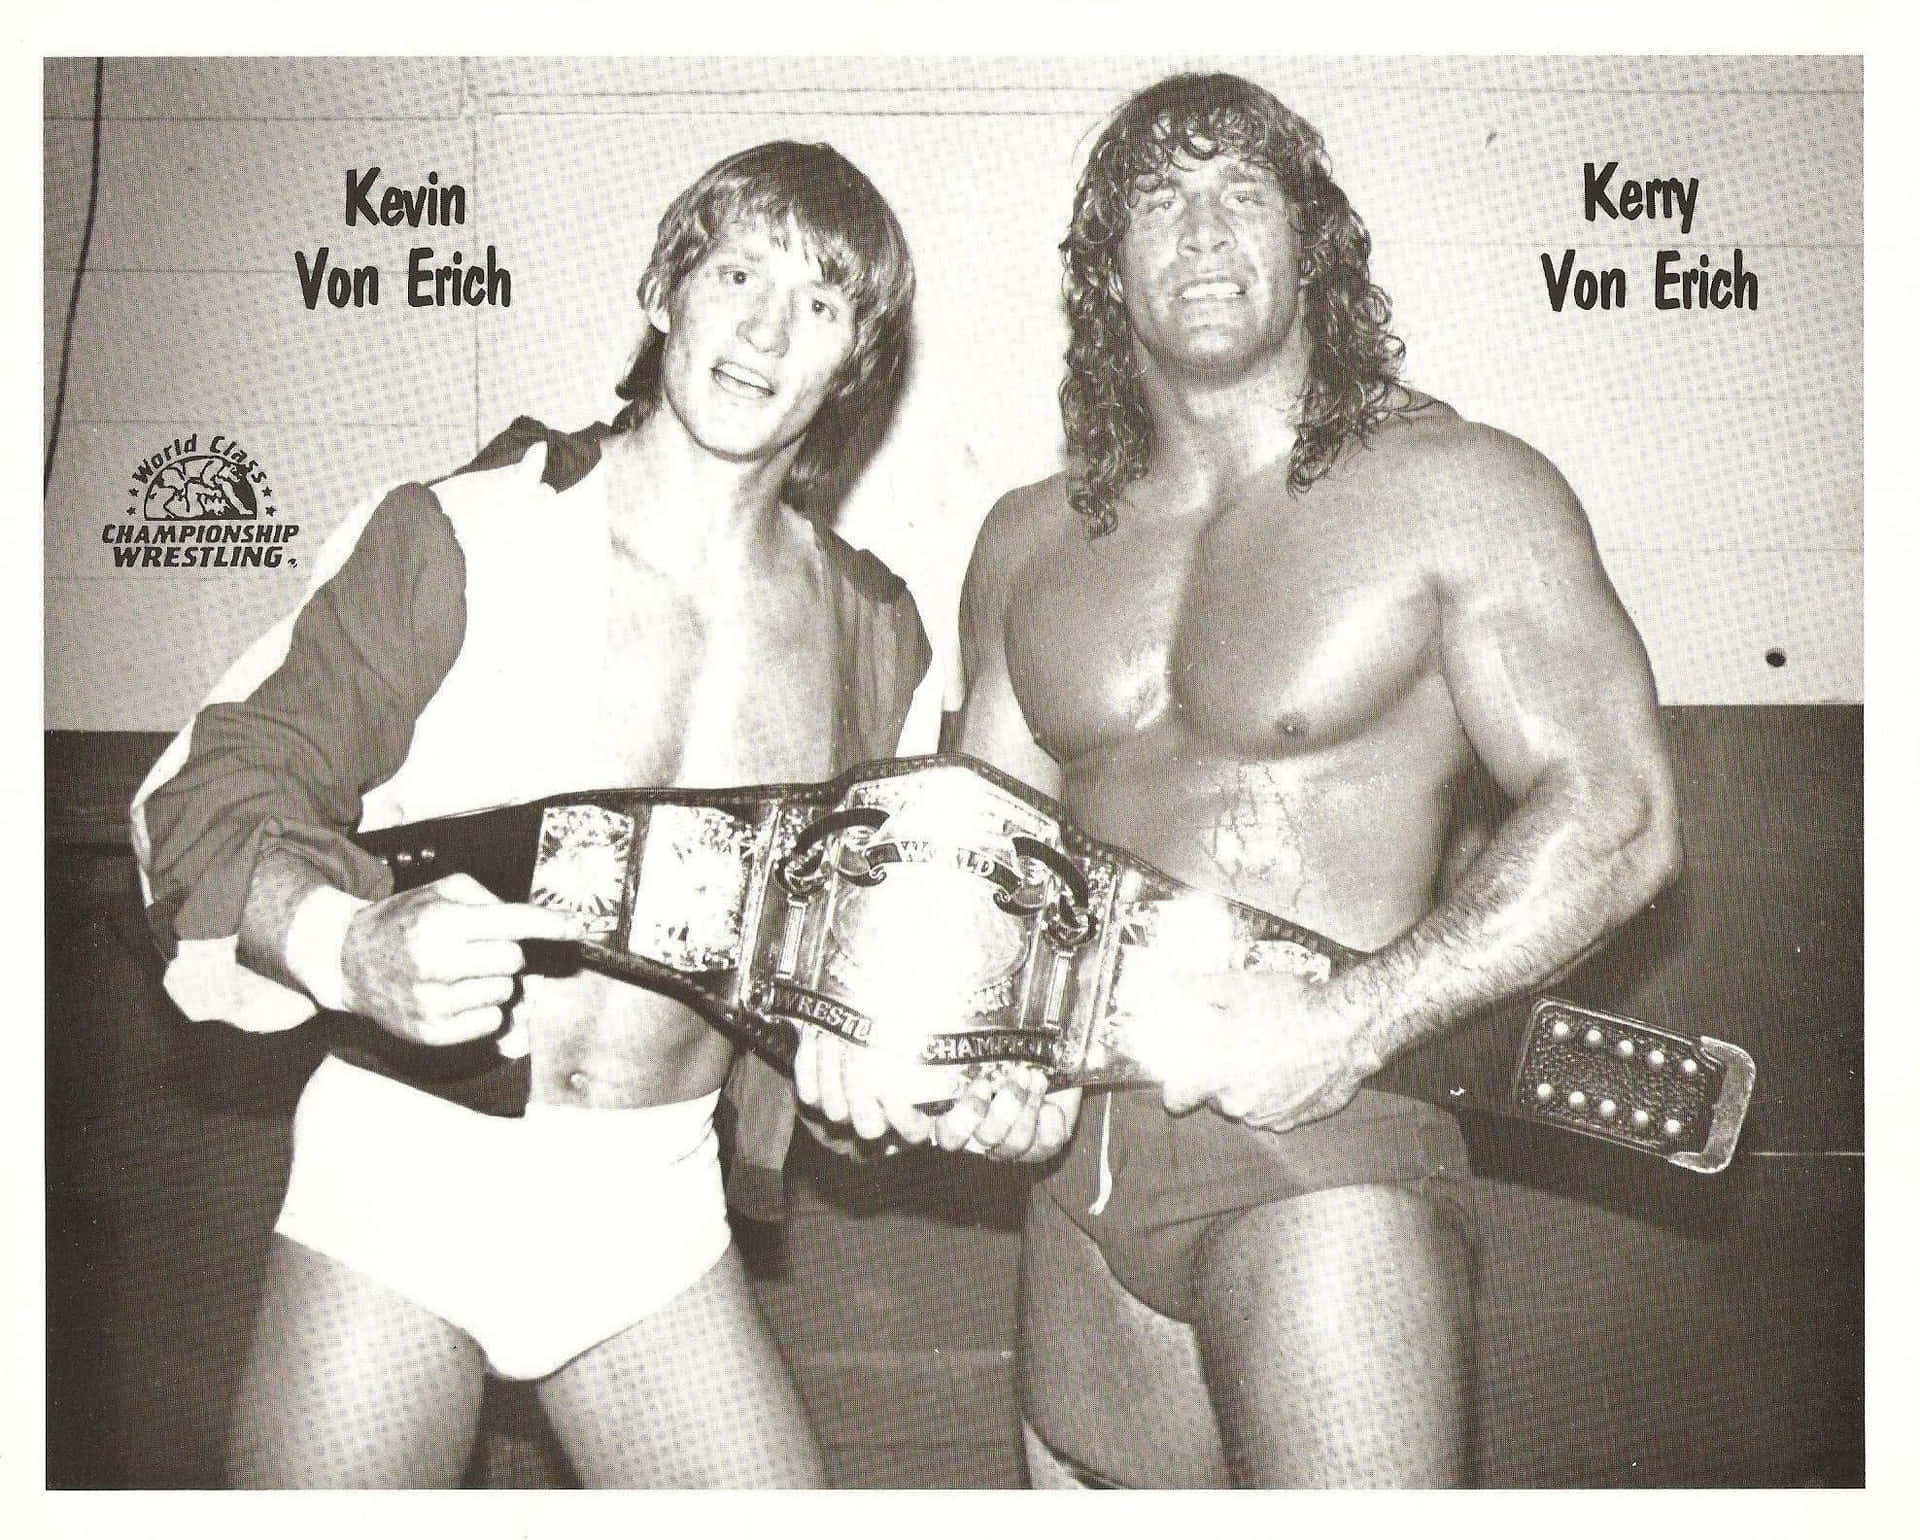 Kerryvon Erich Och Kevin Von Erich. (this Is A Direct Translation. If The Context Requires A More Specific Translation, Please Provide More Information.) Wallpaper